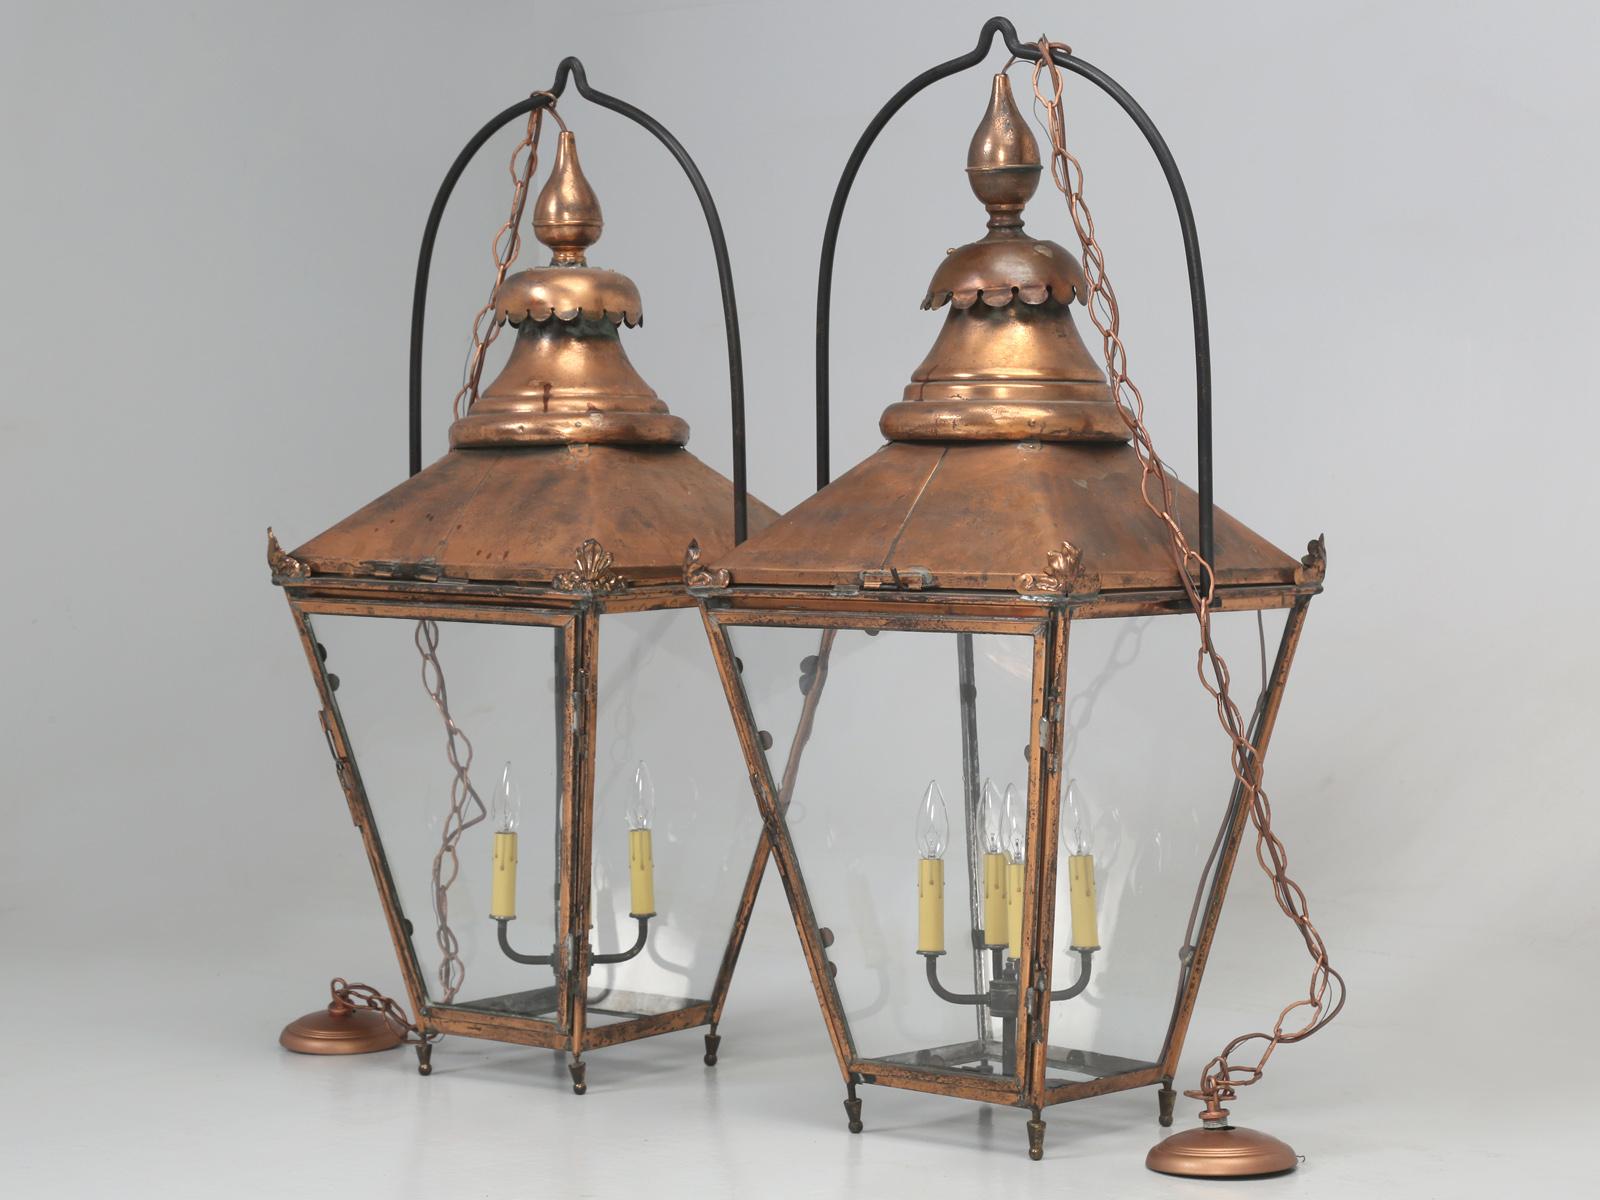 Antique pair of large French copper lanterns, that we imported from France and properly restored in our old plank workshop electrical department; we even fitted the antique pair of French copper lanterns, with handmade French wavy glass and of